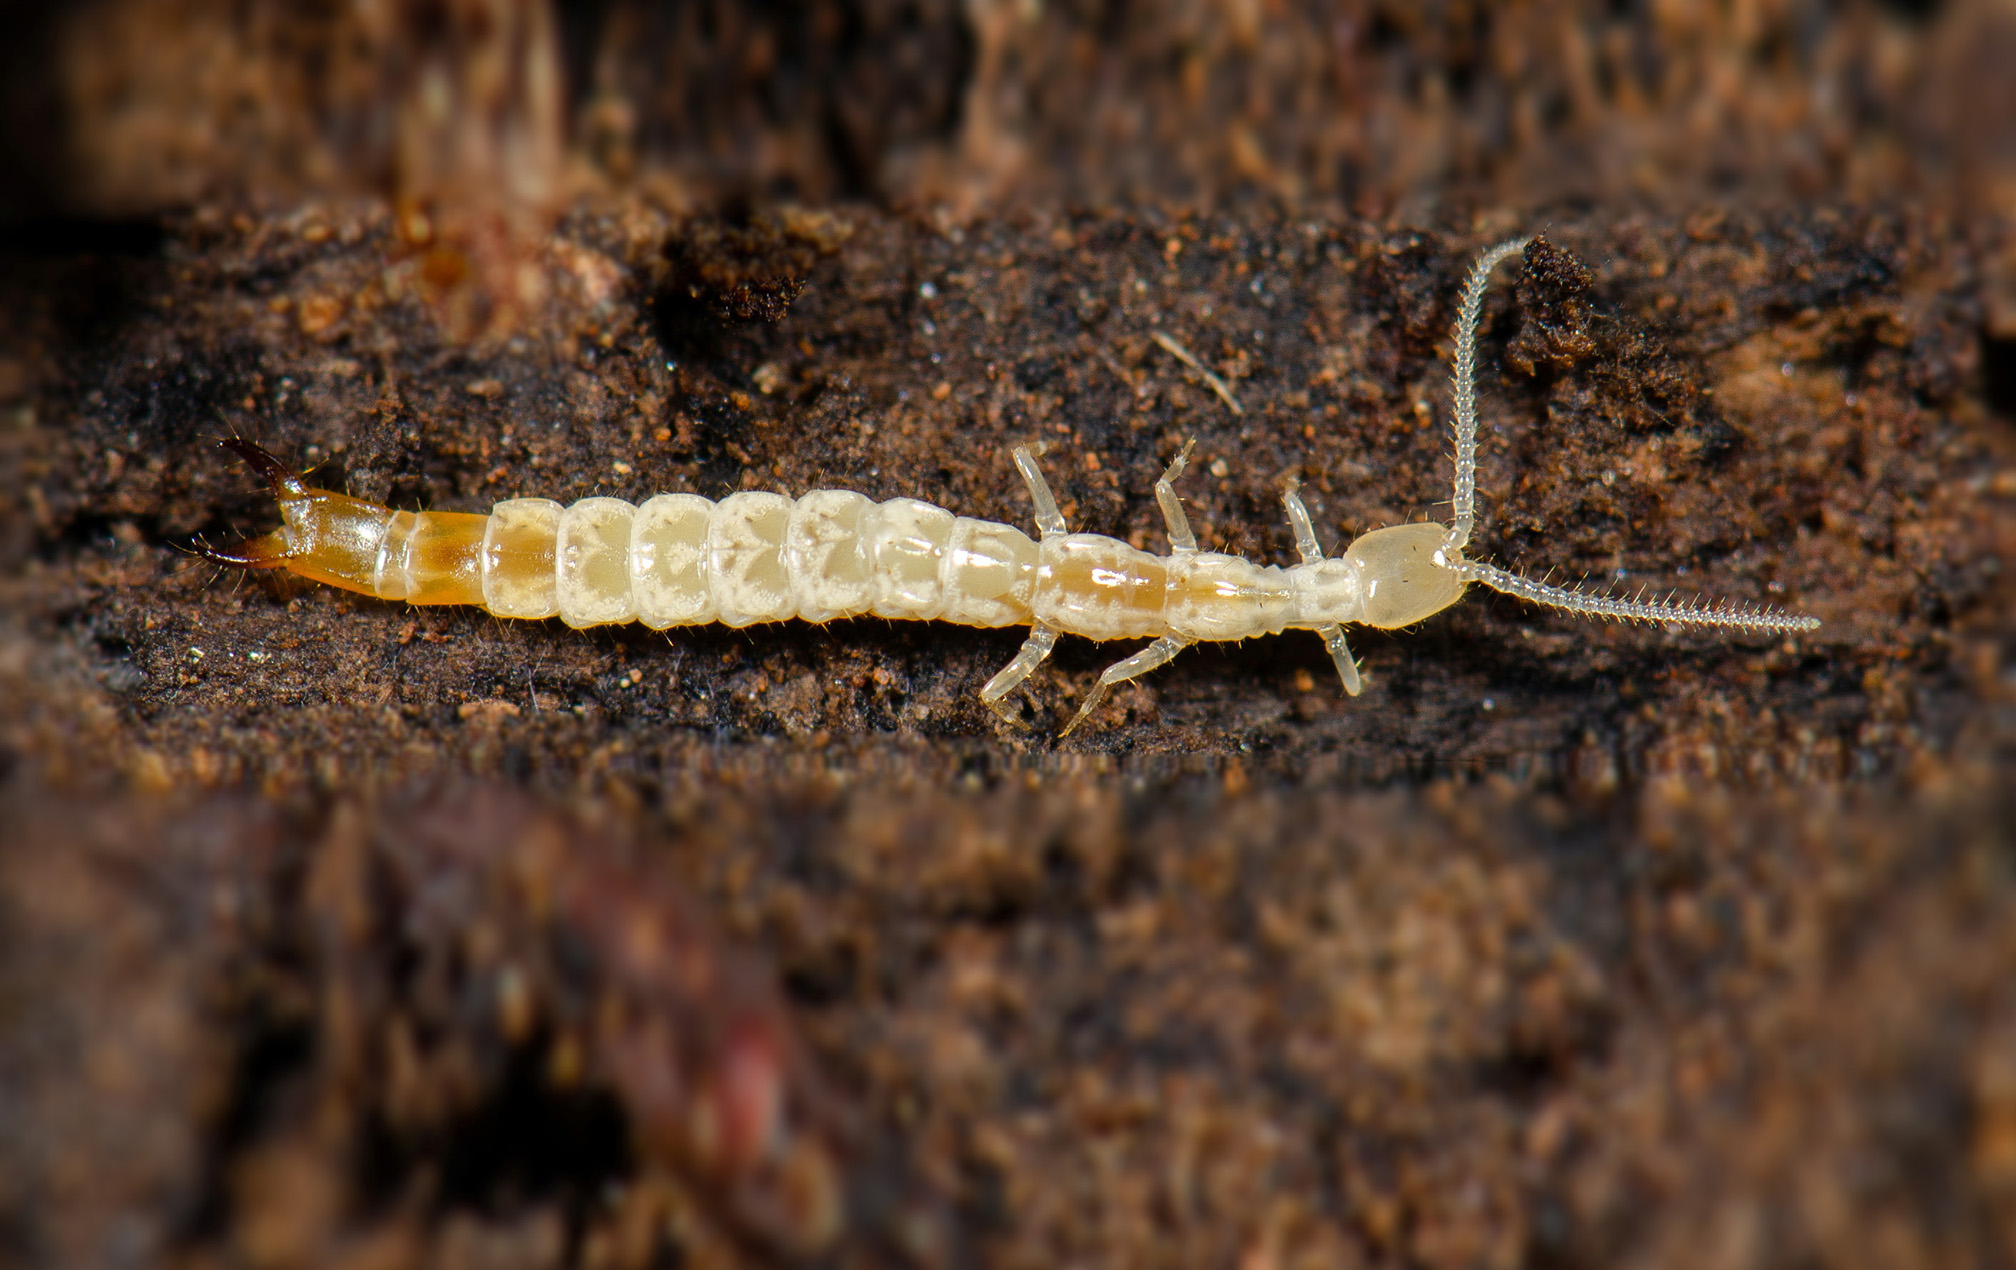 A soil insect called a dipluran. It has a very thin, segmented body and six legs. On its head are two long antennae, and at its rear end are a pair of pincers. The body is very pale in color, almost white, except for the pinchers which are brown.